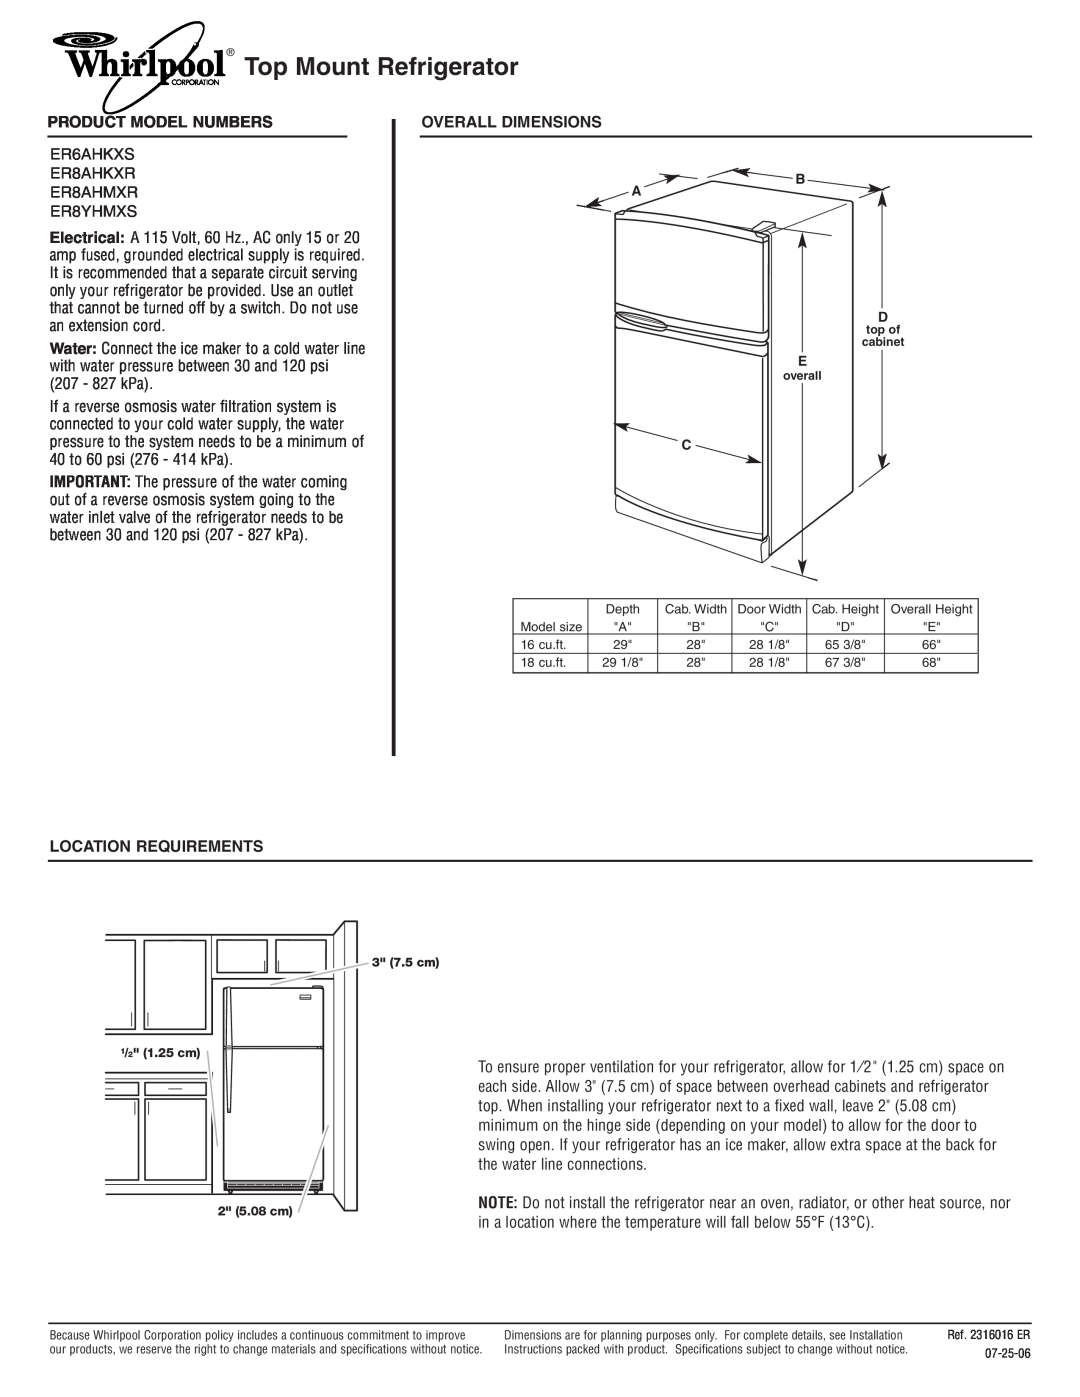 Whirlpool ER8AHMXR dimensions Top Mount Refrigerator, Product Model Numbers, Overall Dimensions, Location Requirements 